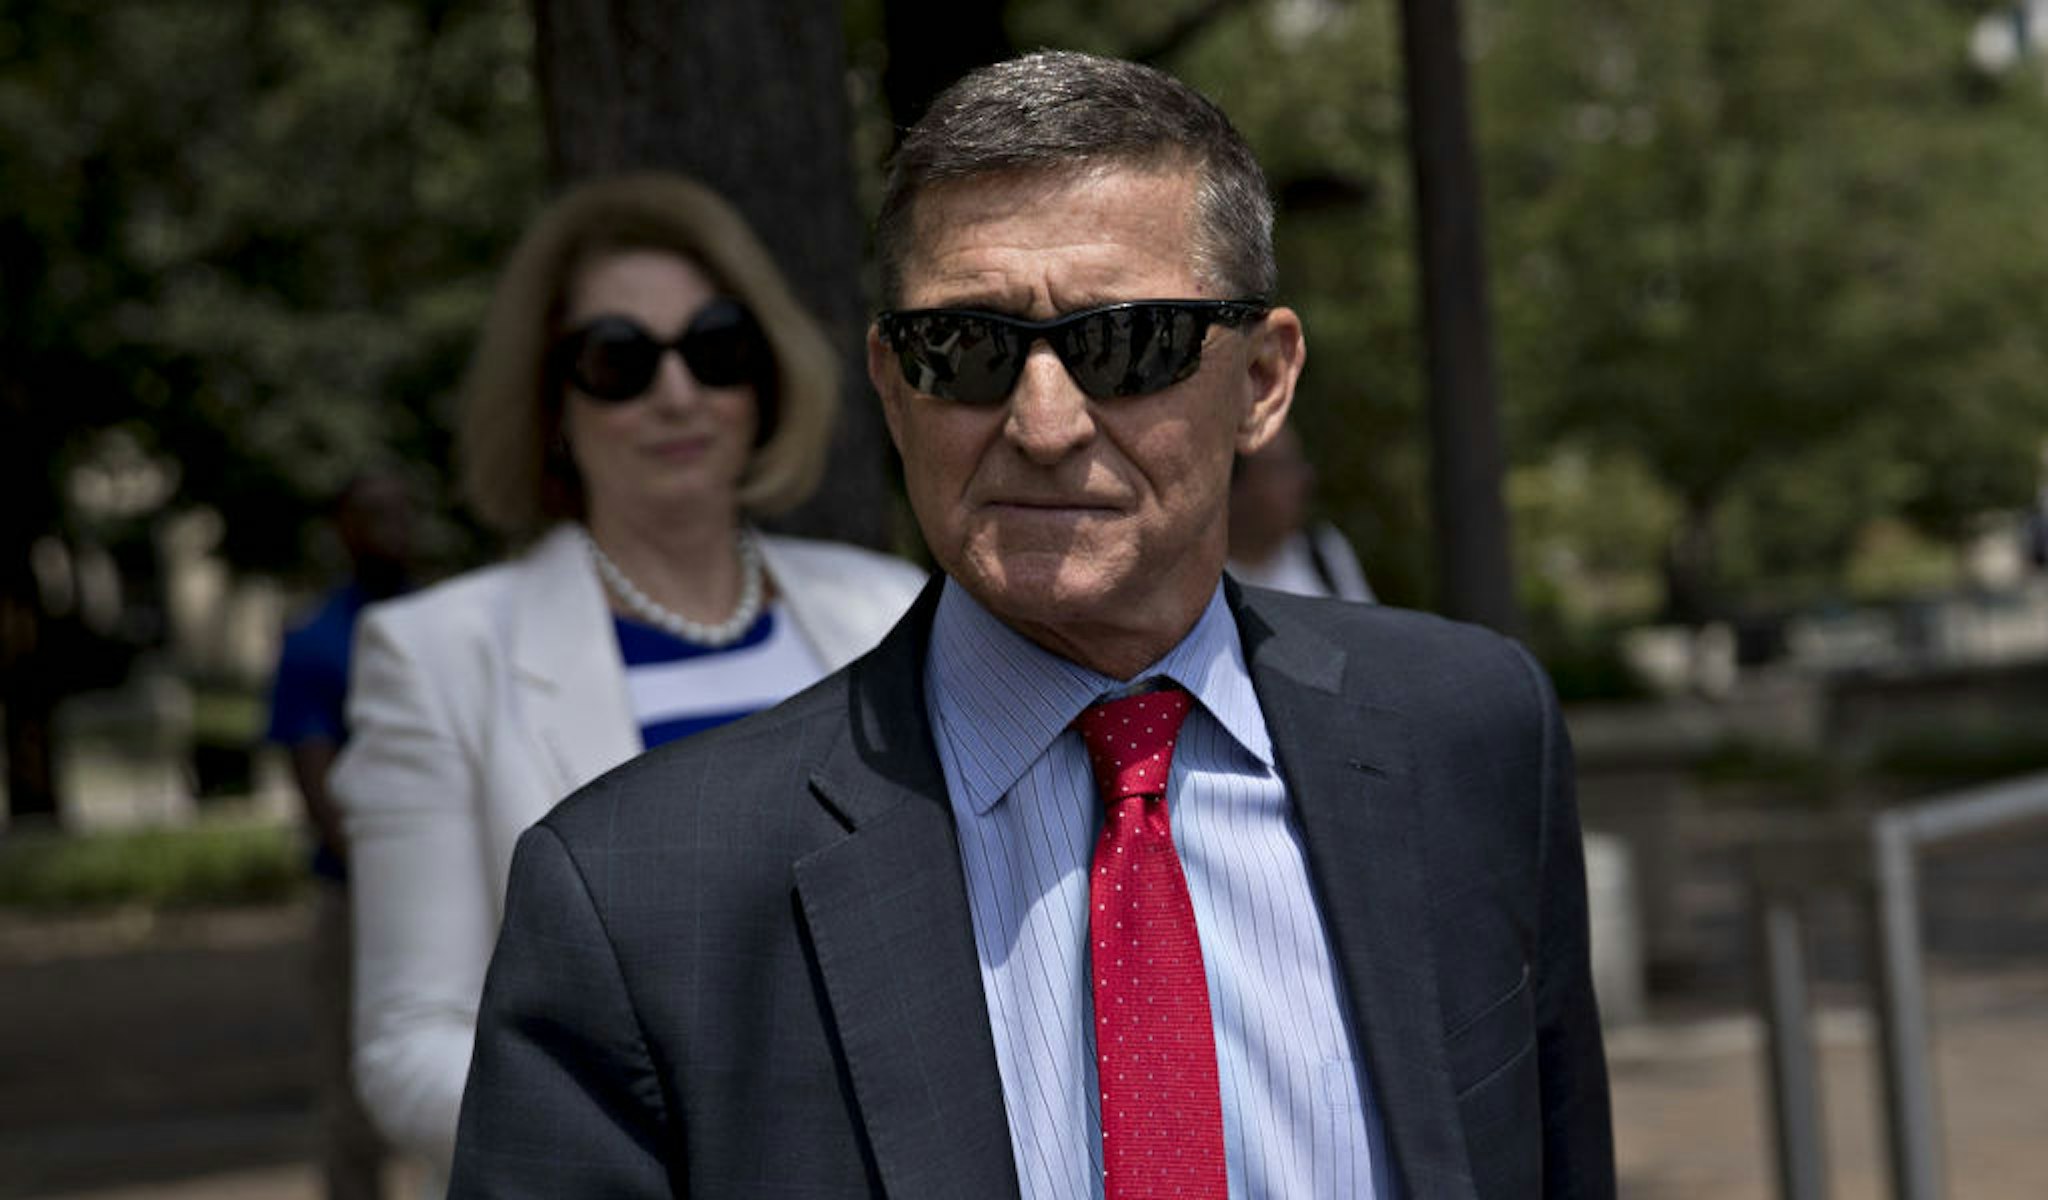 Michael Flynn, former U.S. national security adviser, exits federal court in Washington, D.C., U.S., on Monday, June 24, 2019. Flynn may have a singular goal in replacing his longtime criminal defense attorneys this month with the politically provocative Sidney Powell, to win a pardon from his old boss, President Donald Trump. Photographer: Andrew Harrer/Bloomberg